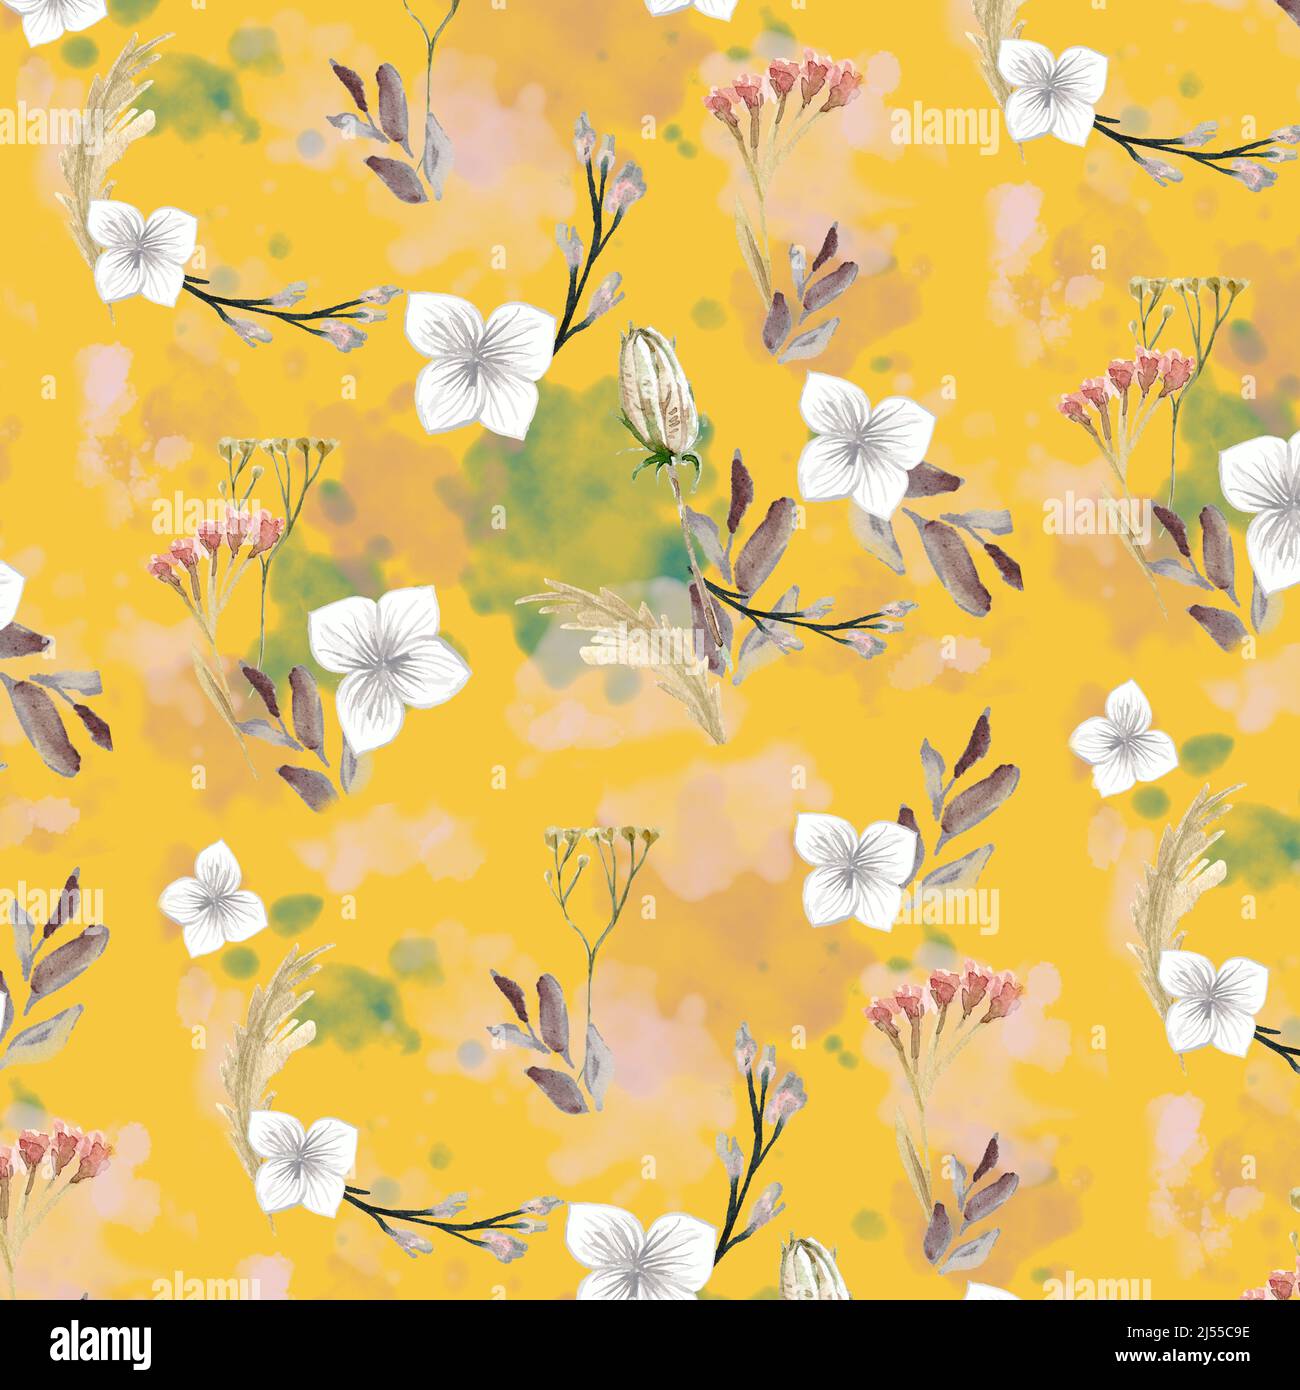 Watercolor floral boho pattern saffron yellow background in this pretty and cheery flower pattern design element. Stock Photo